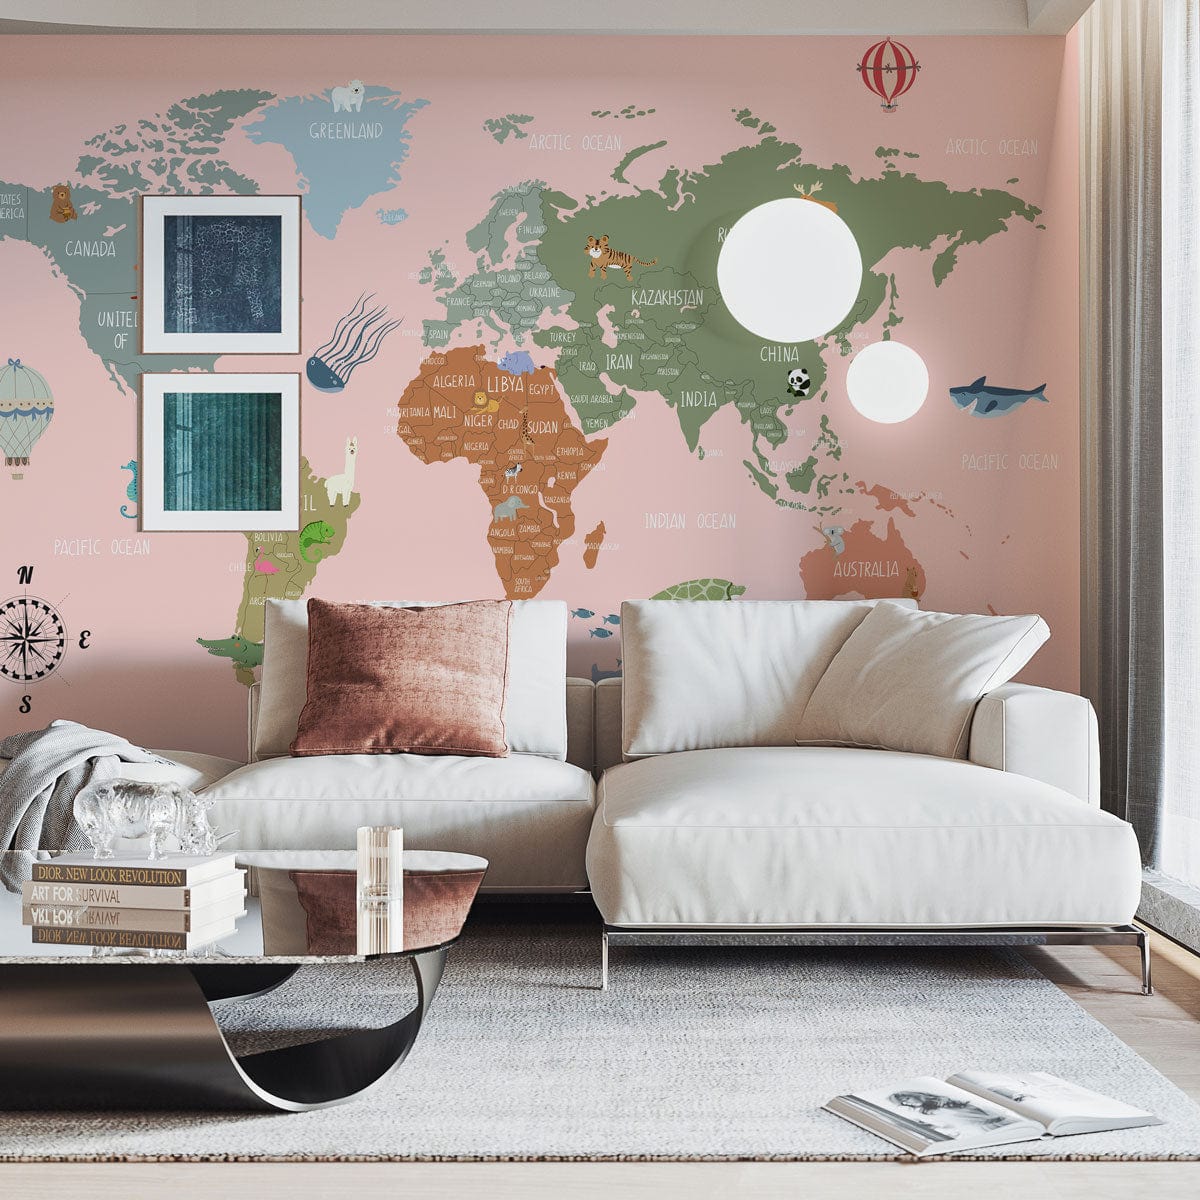 Mural wallpaper design featuring a pink cartoon map for use in decorating the living room